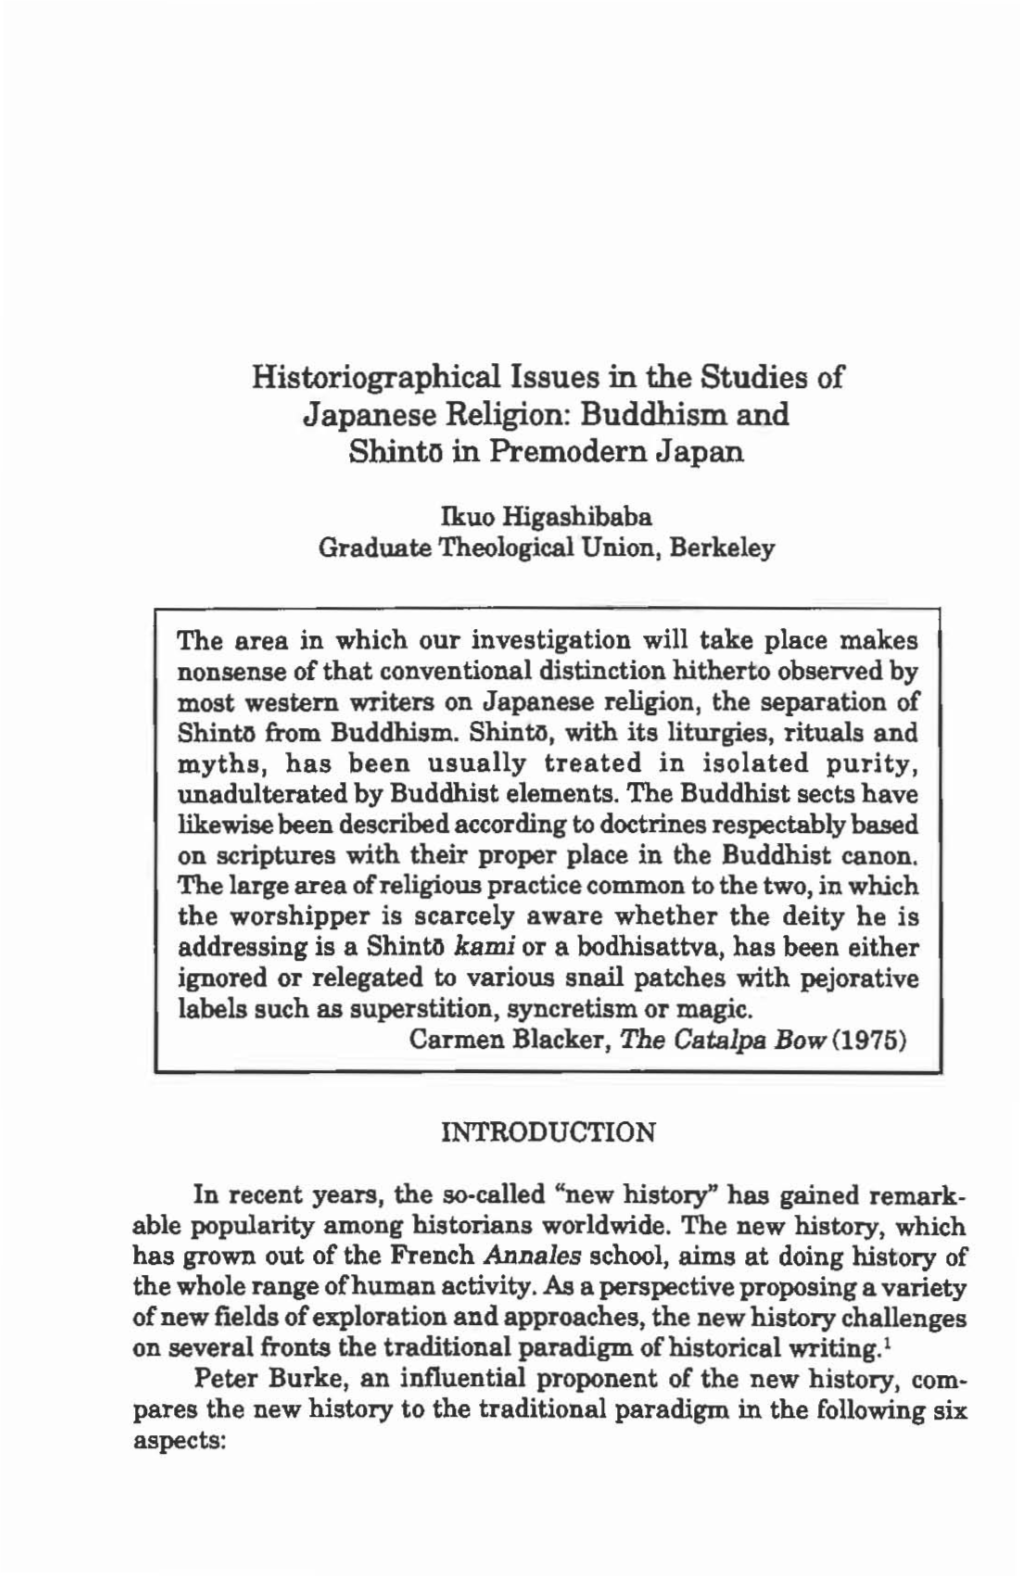 Historiographical Issues in the Studies of Japanese Religion: Buddhism and Shinto in Premodern Japan